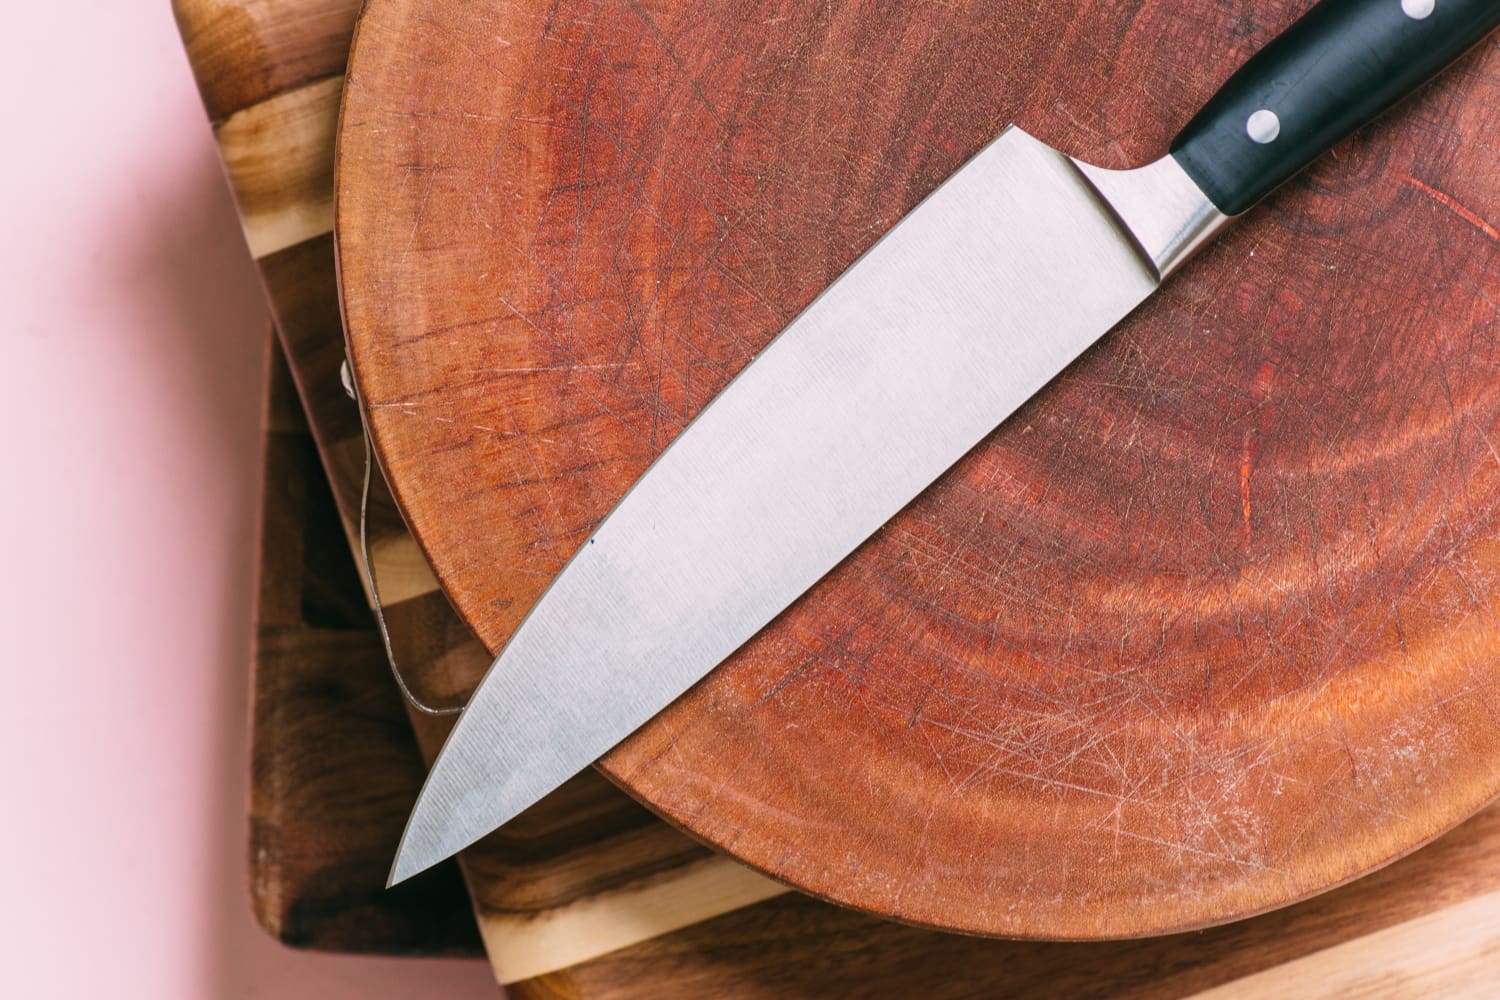 Technique Set of 3 Knives with Wooden Storage/Cutting Board 